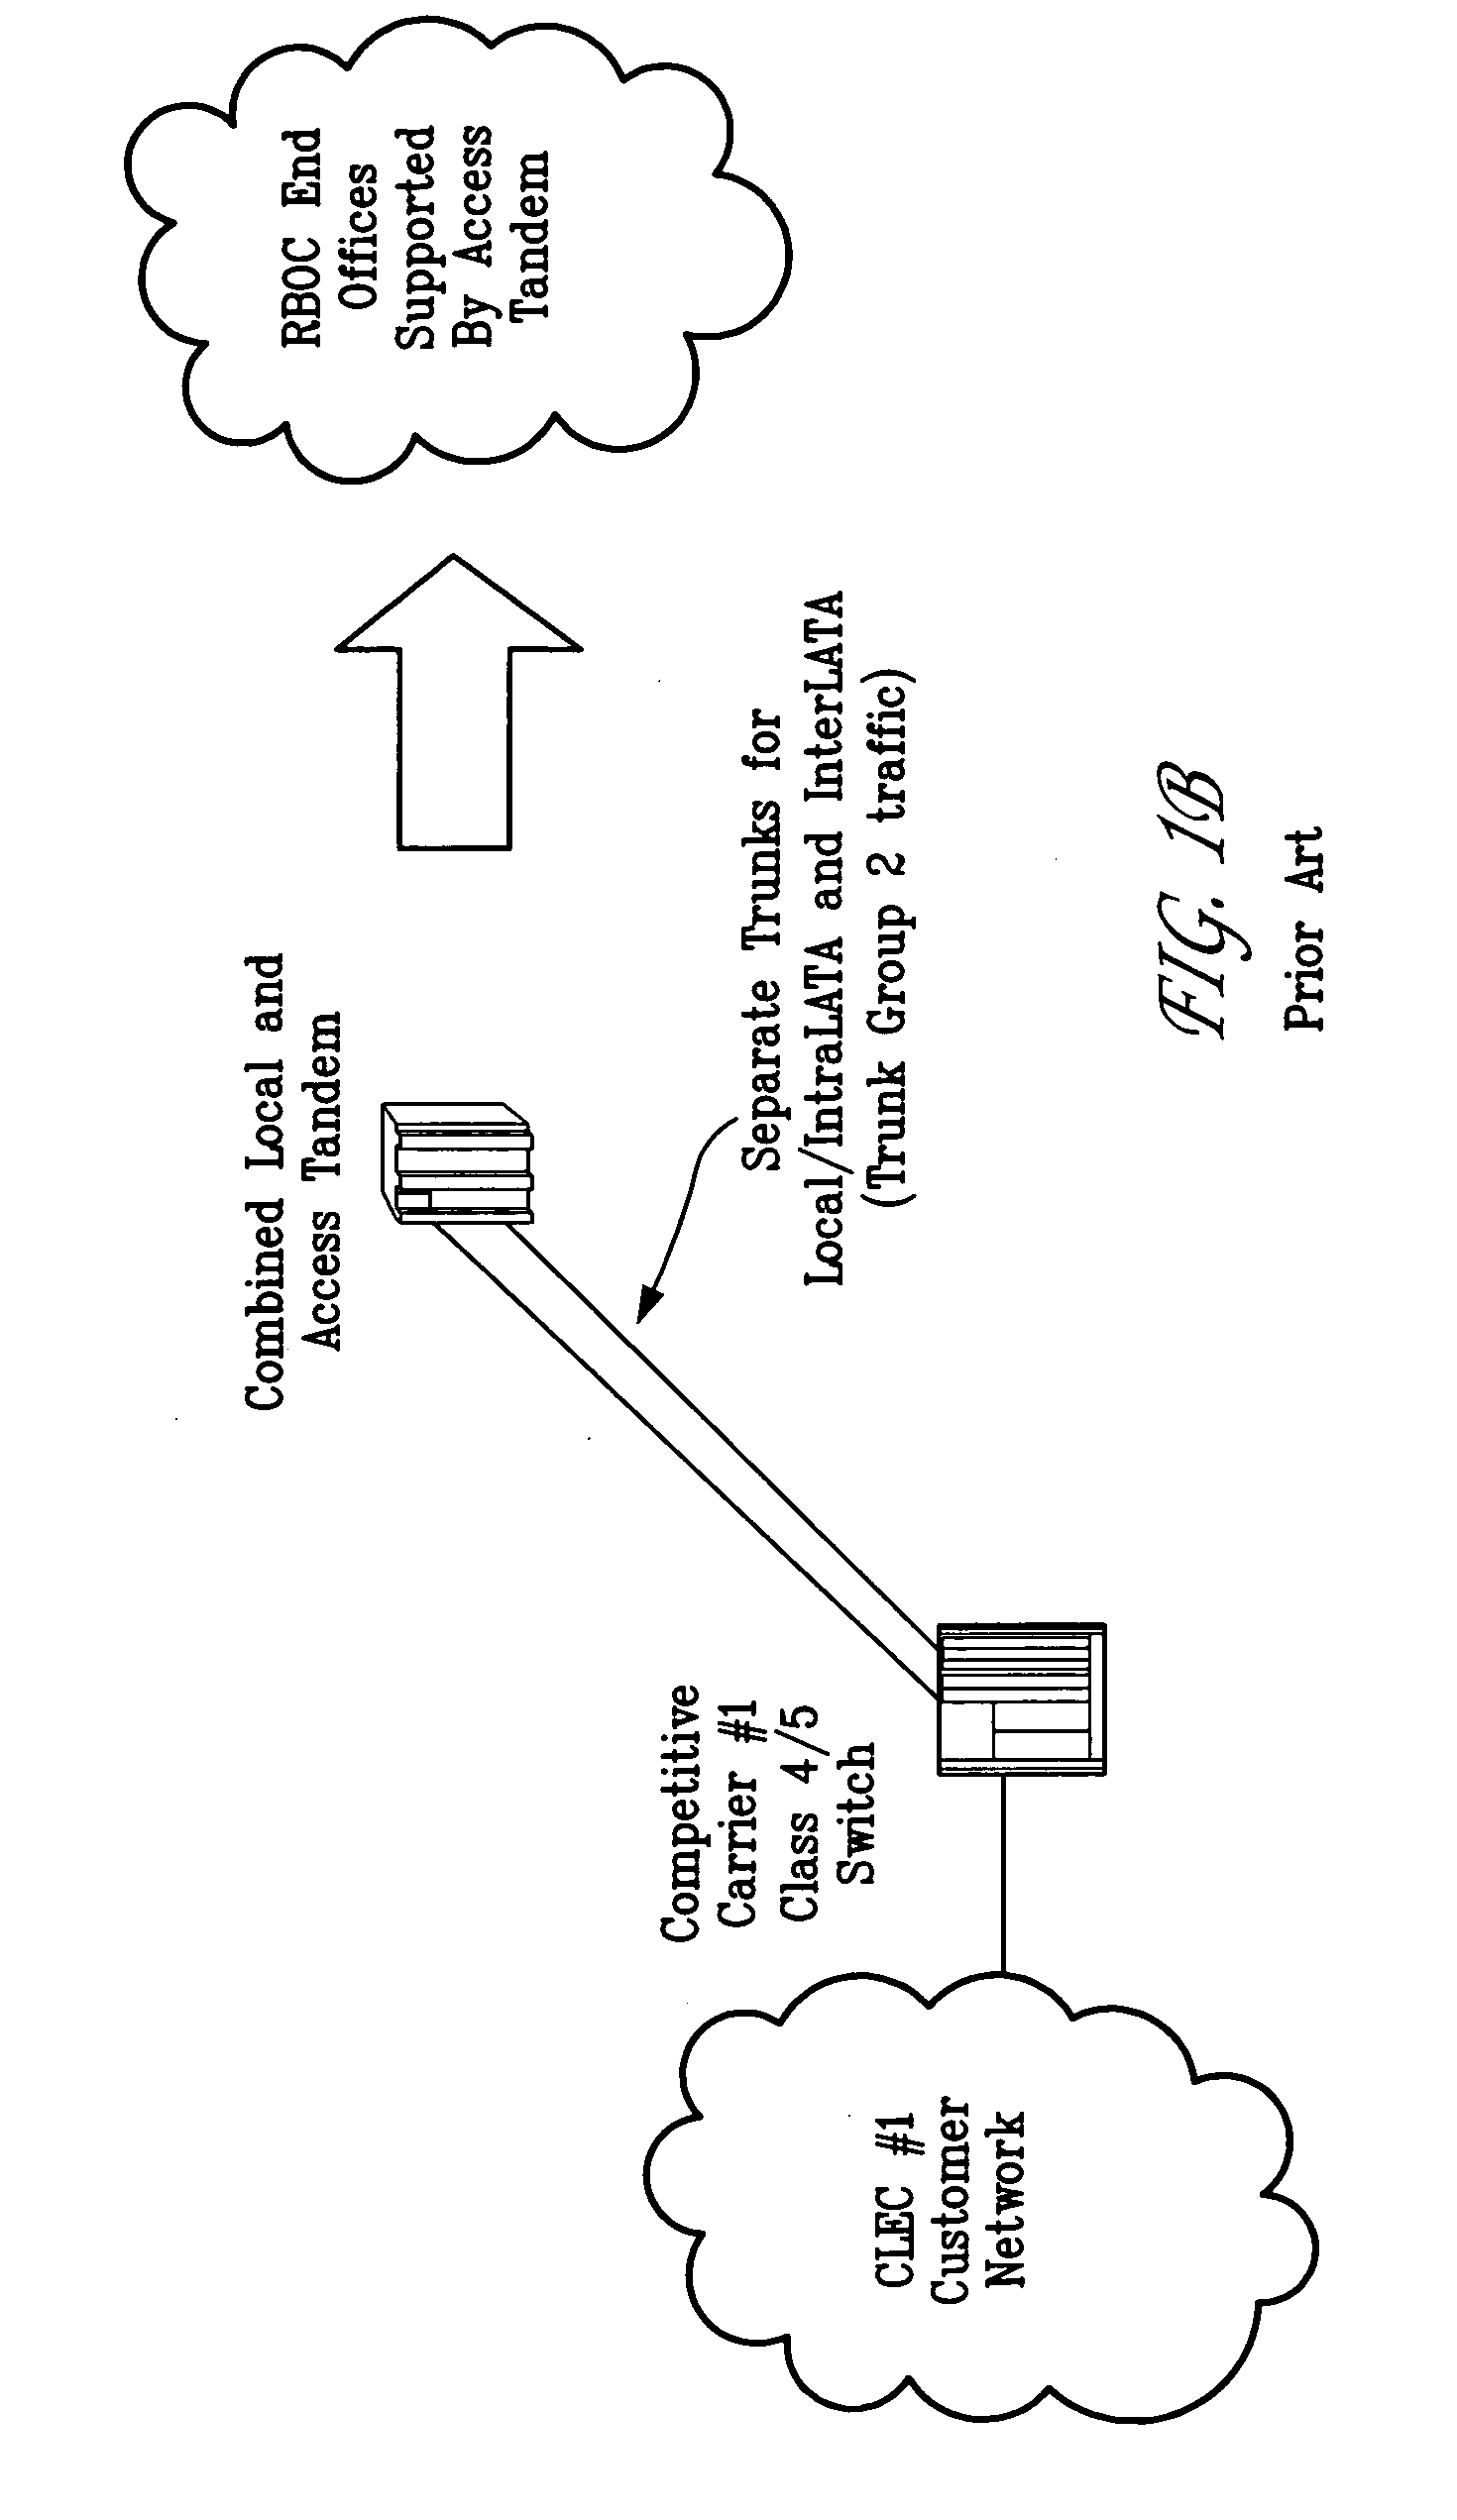 Neutral tandem telecommunications network providing transiting, terminating, and advanced traffic routing services to public and private carrier networks